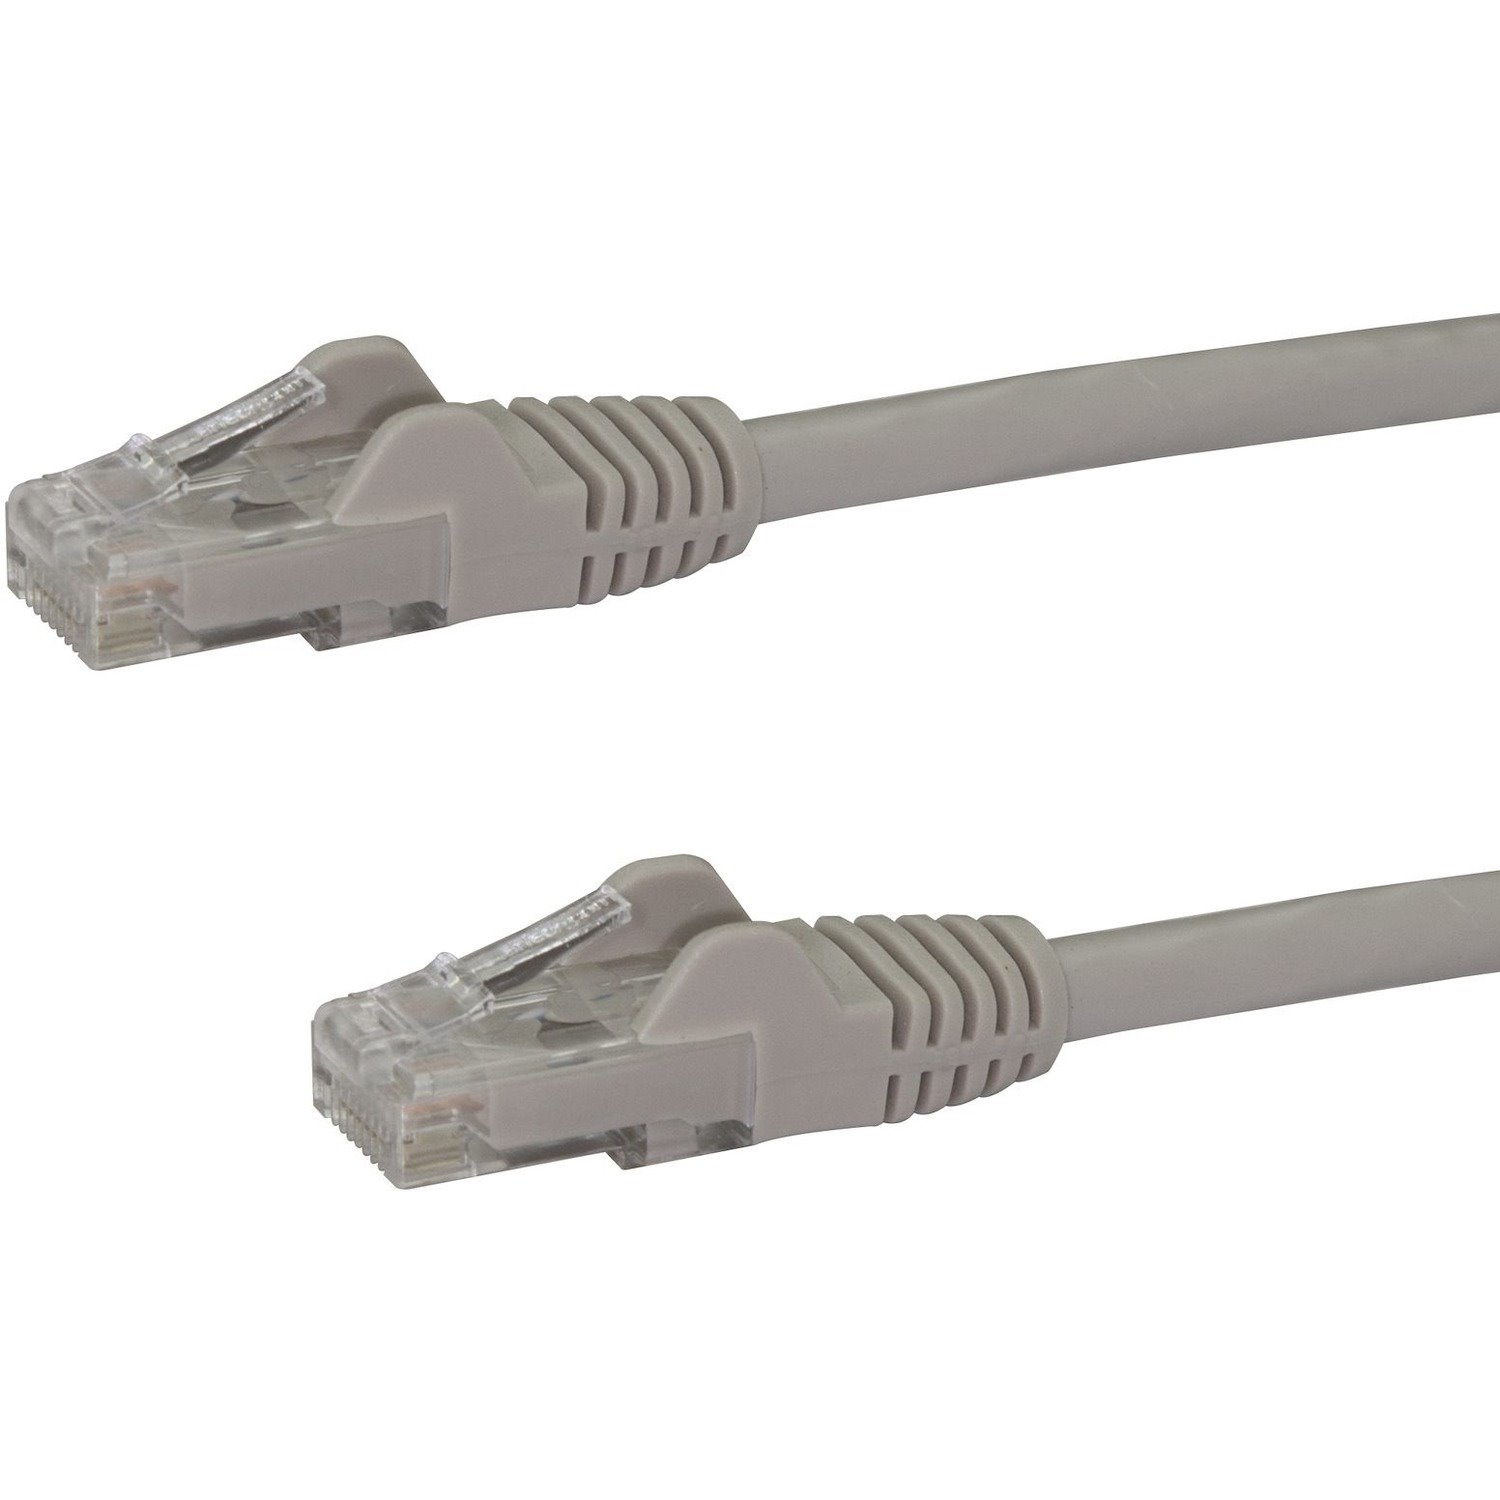 StarTech.com 15ft CAT6 Ethernet Cable - Gray Snagless Gigabit - 100W PoE UTP 650MHz Category 6 Patch Cord UL Certified Wiring/TIA